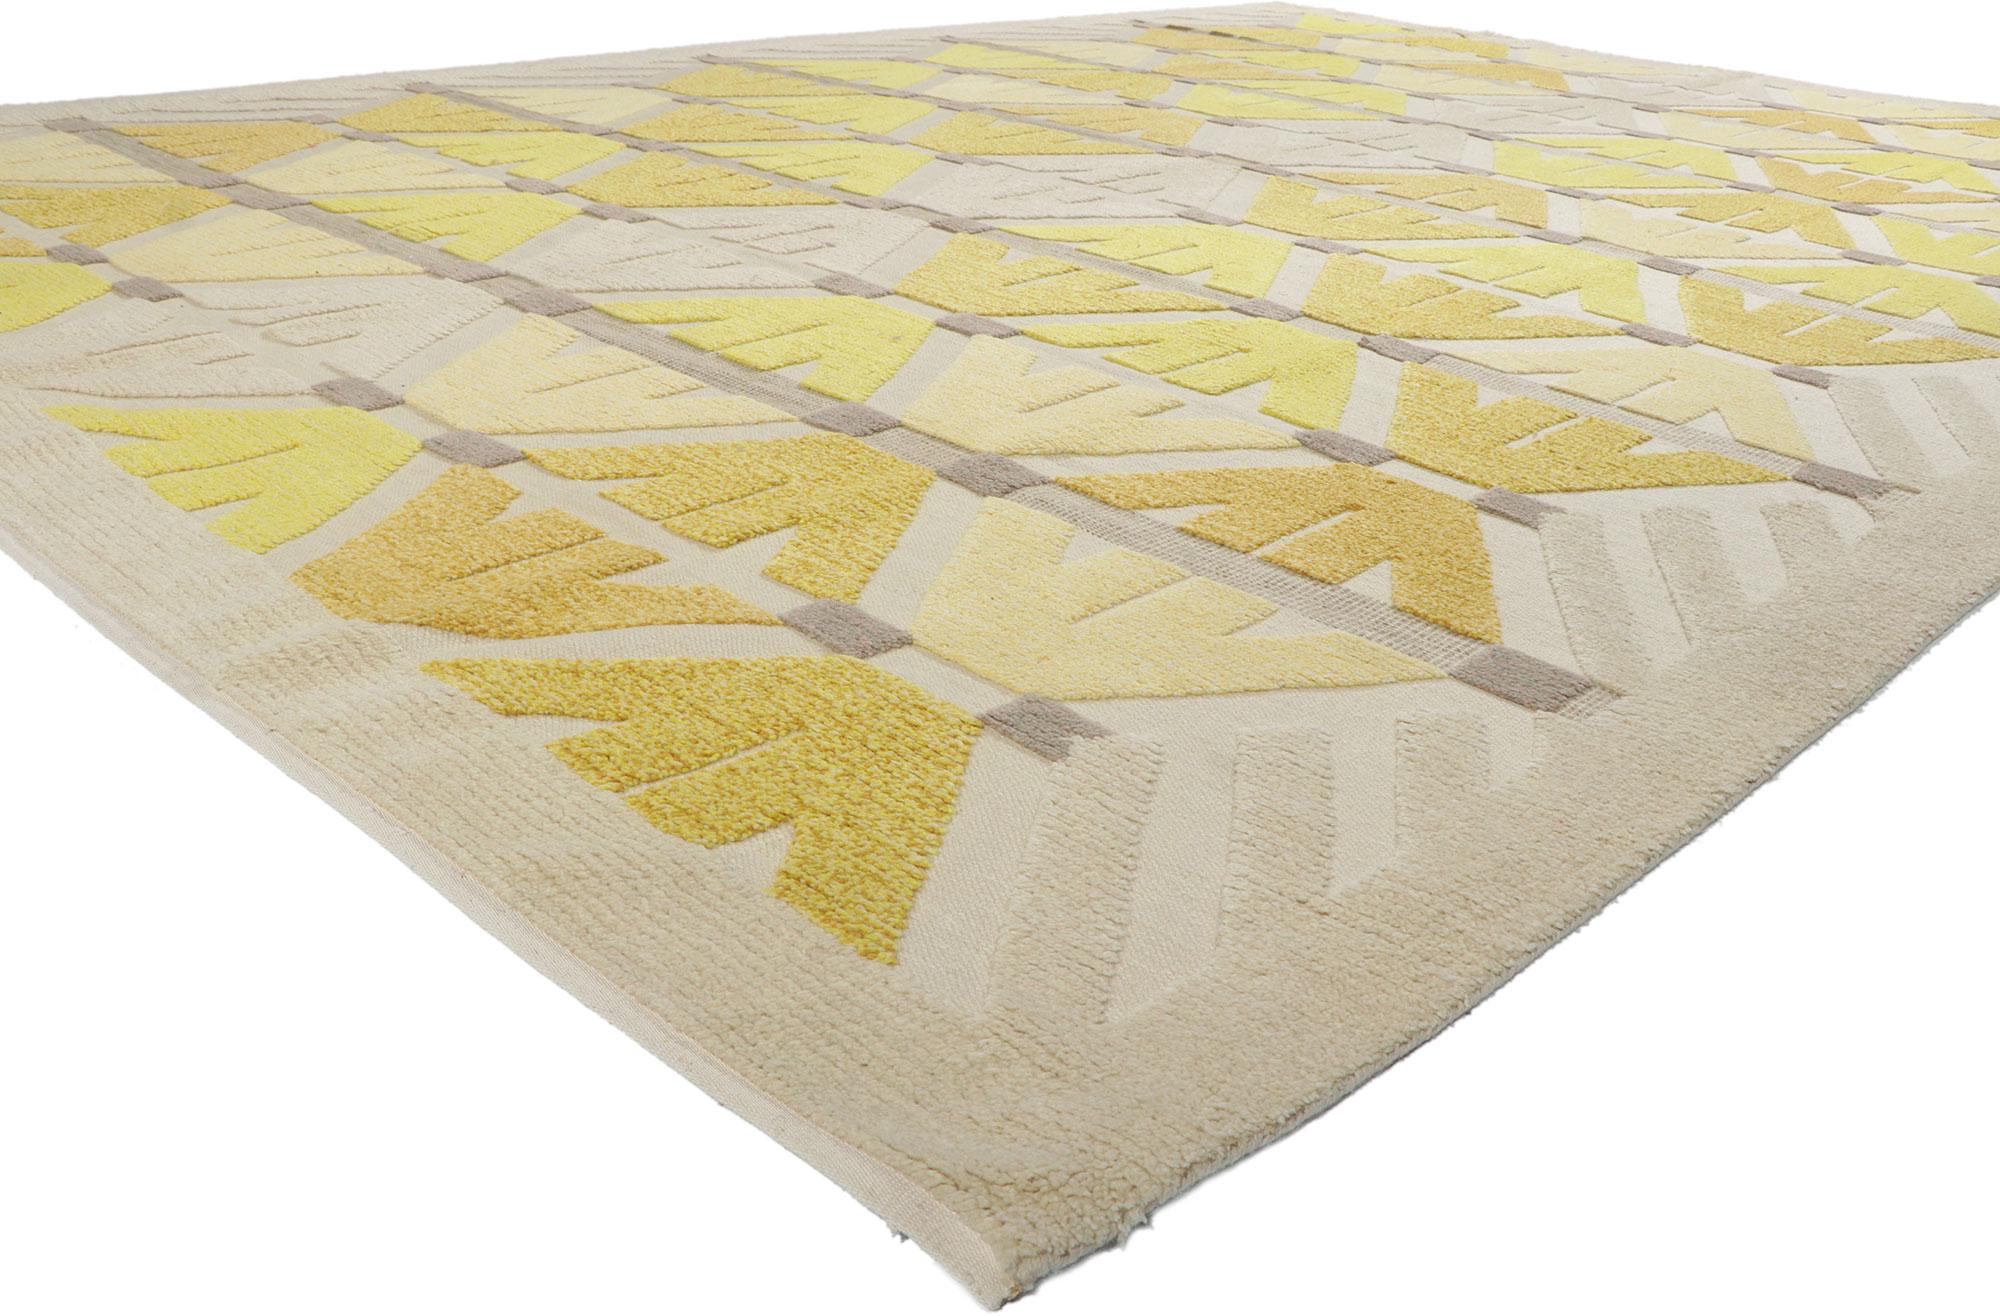 30376 New geometric high-low rug 10'04 x 14'06.
Showcasing a conceptual raised design with incredible detail and texture, this contemporary high-low rug is a captivating vision of woven beauty. The eye-catching bold design and colorway woven into